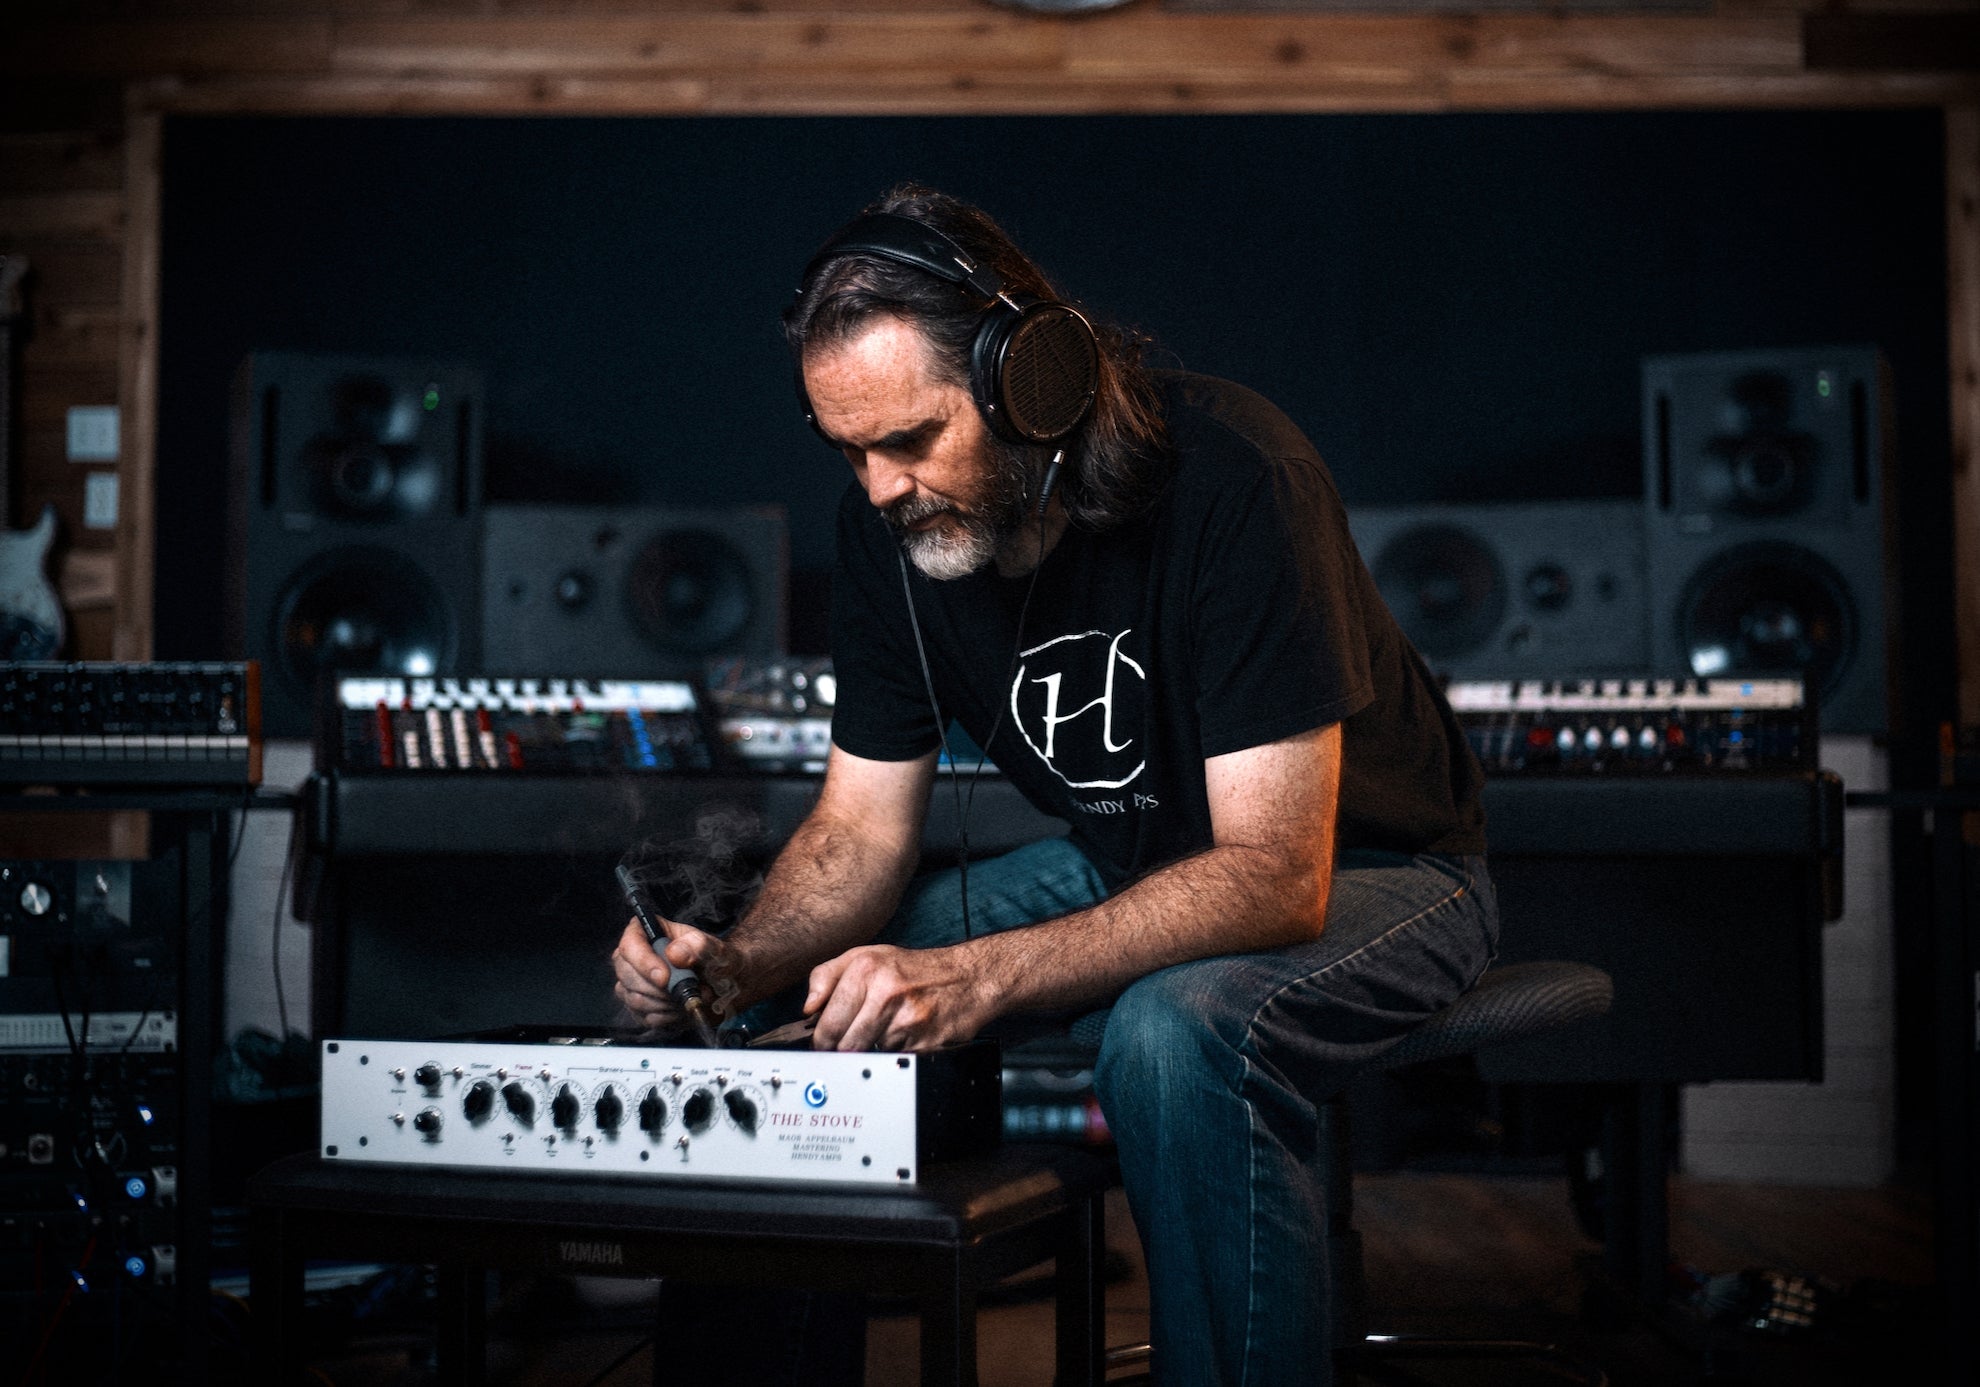 Chirs Henderson works on a piece of gear with his Audeze LCD-X headphones